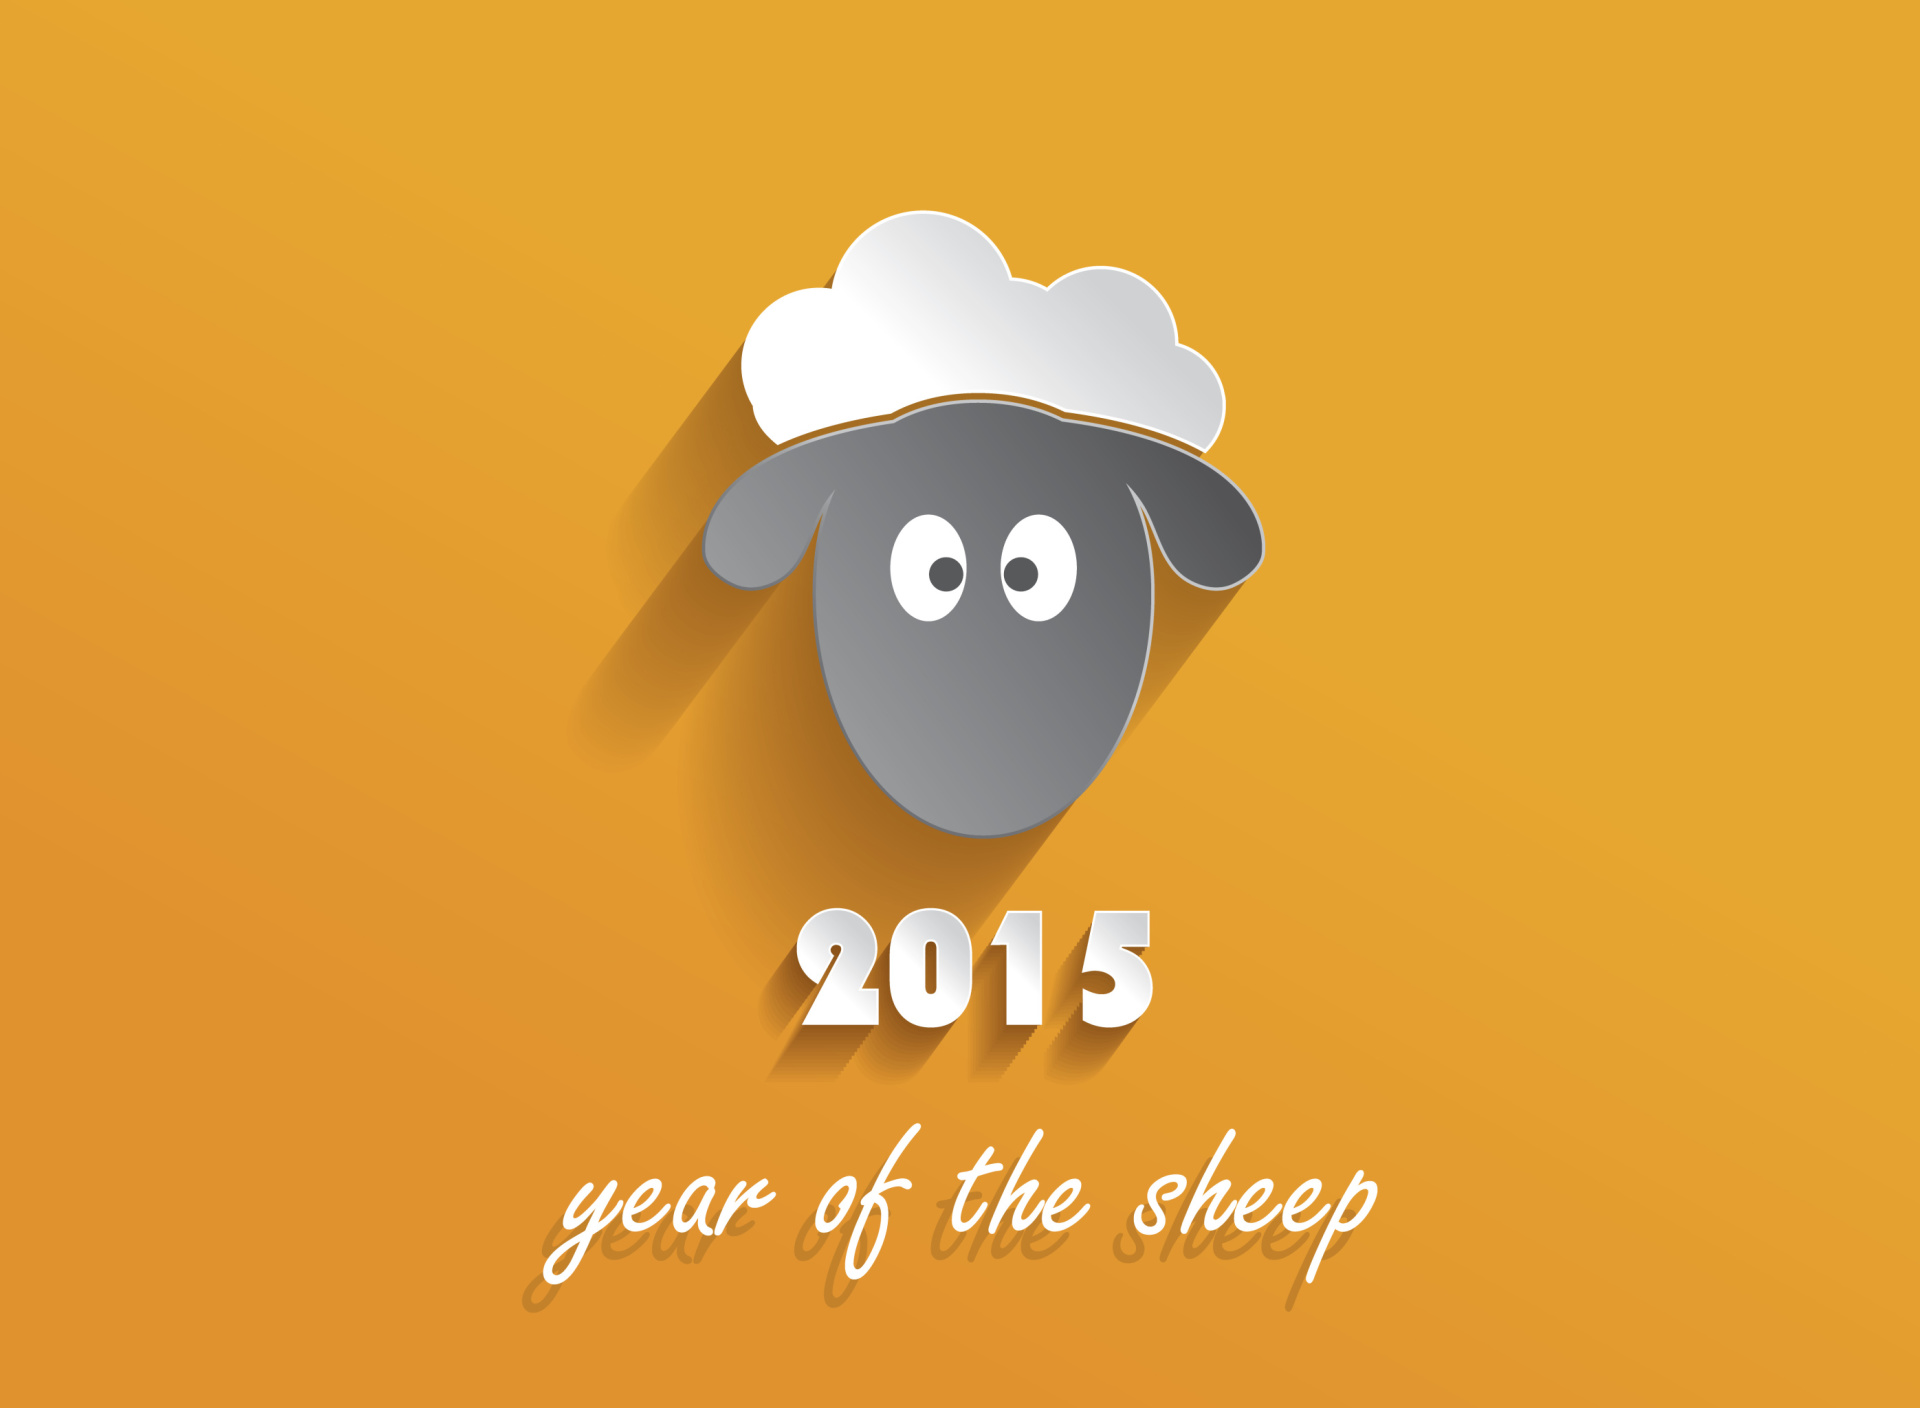 Year of the Sheep 2015 wallpaper 1920x1408